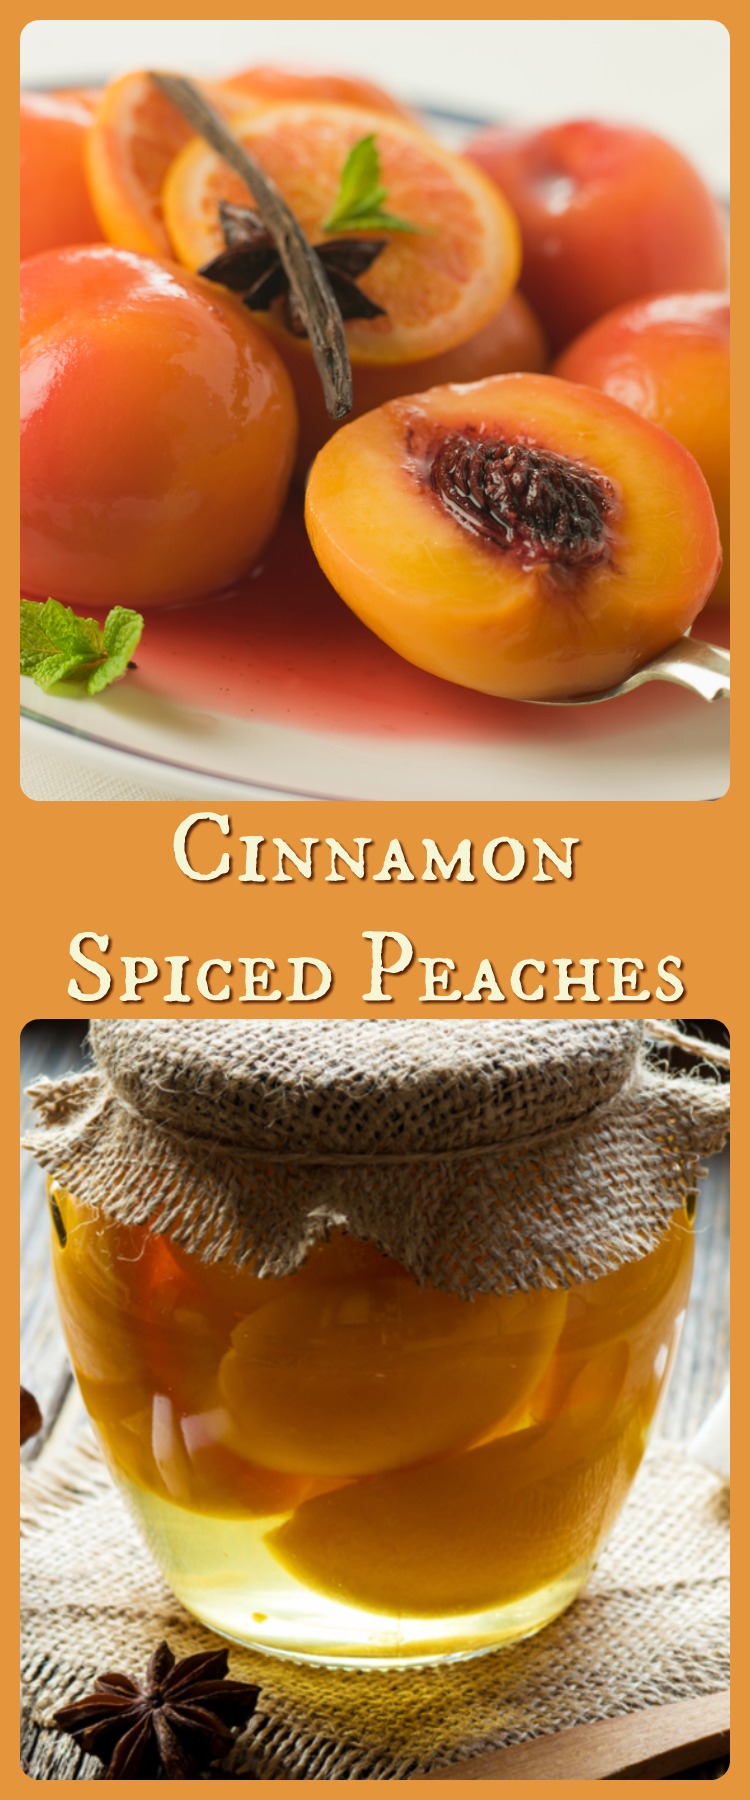 Serve old fashioned, homestyle cinnamon spiced peaches with all your celebration meals.